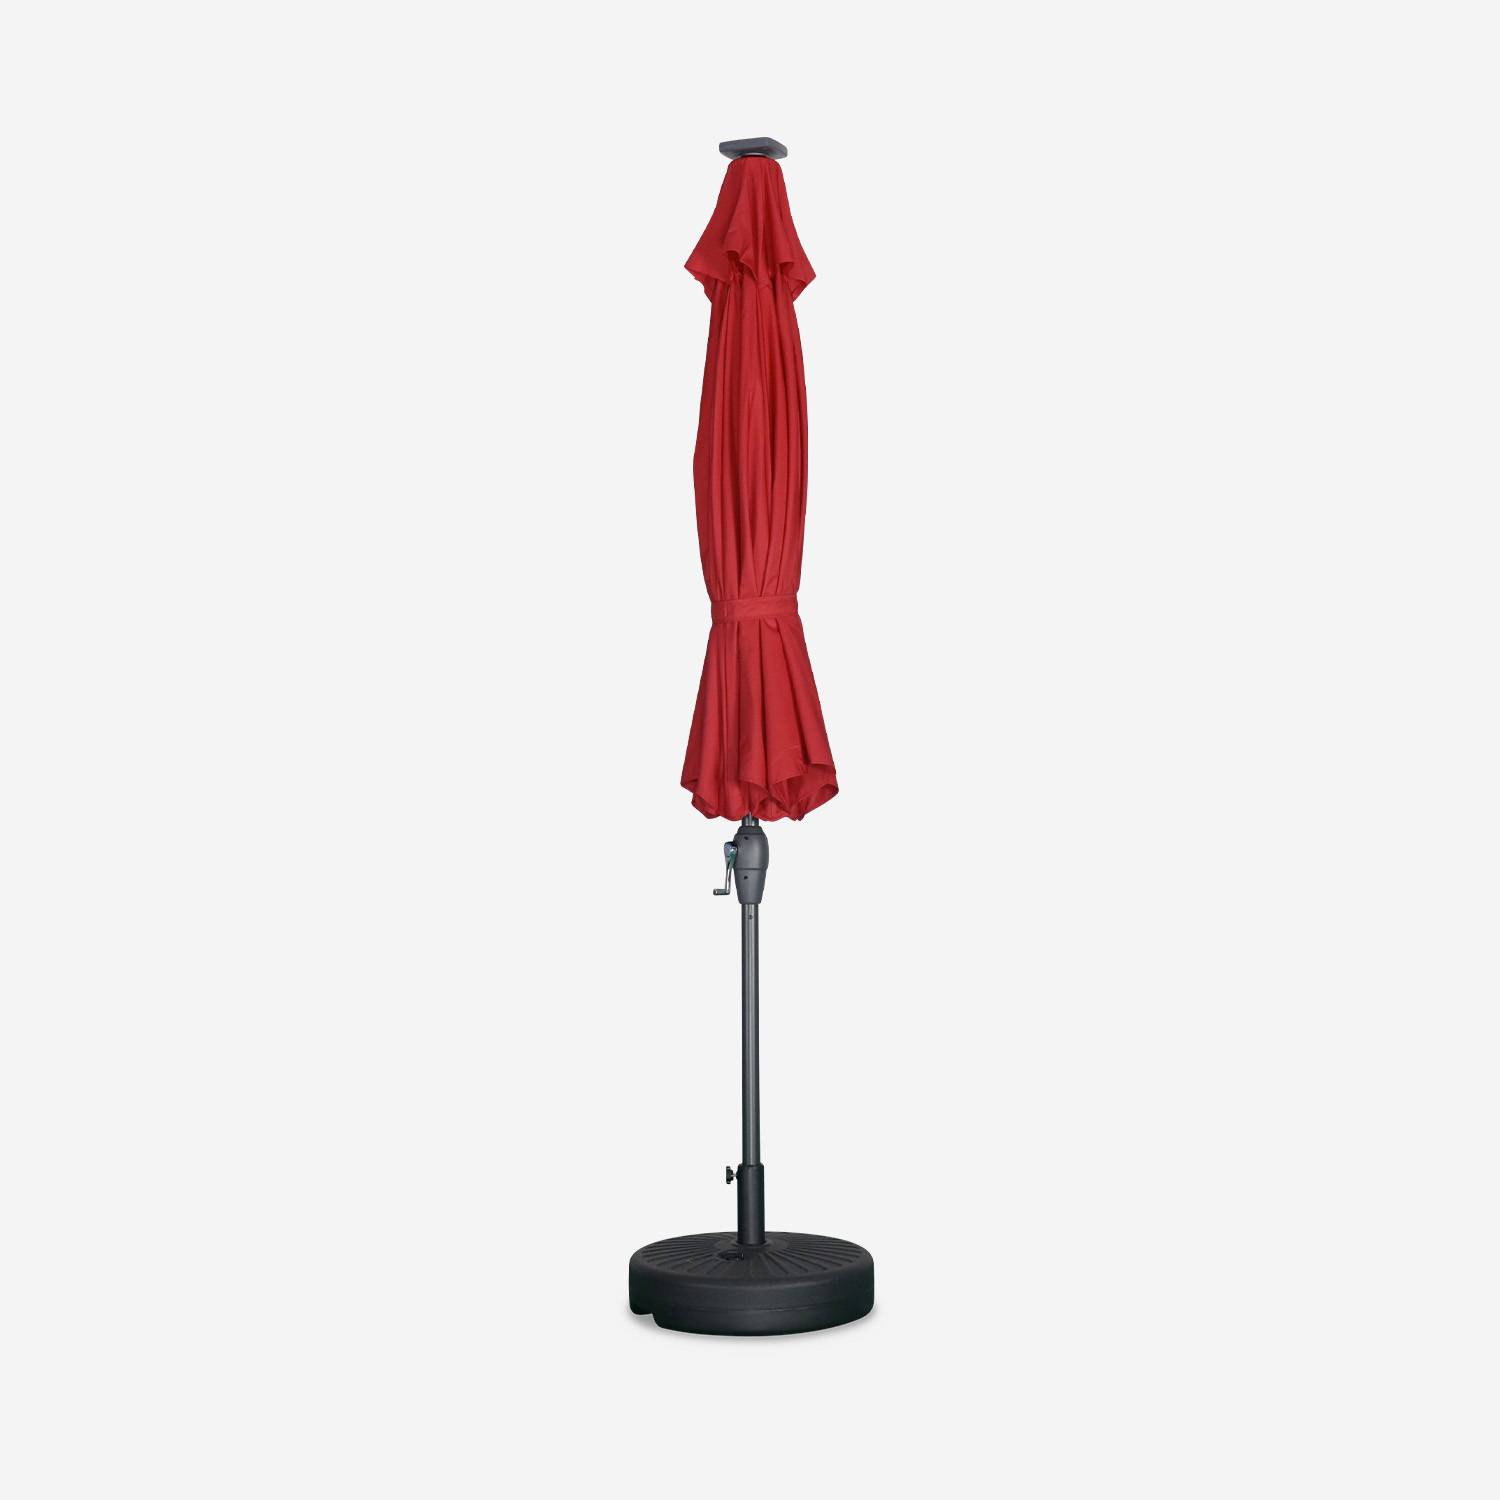 2.7m round centre pole LED parasol - adjustable aluminium central mast and crank handle opening - Helios - Red,sweeek,Photo3